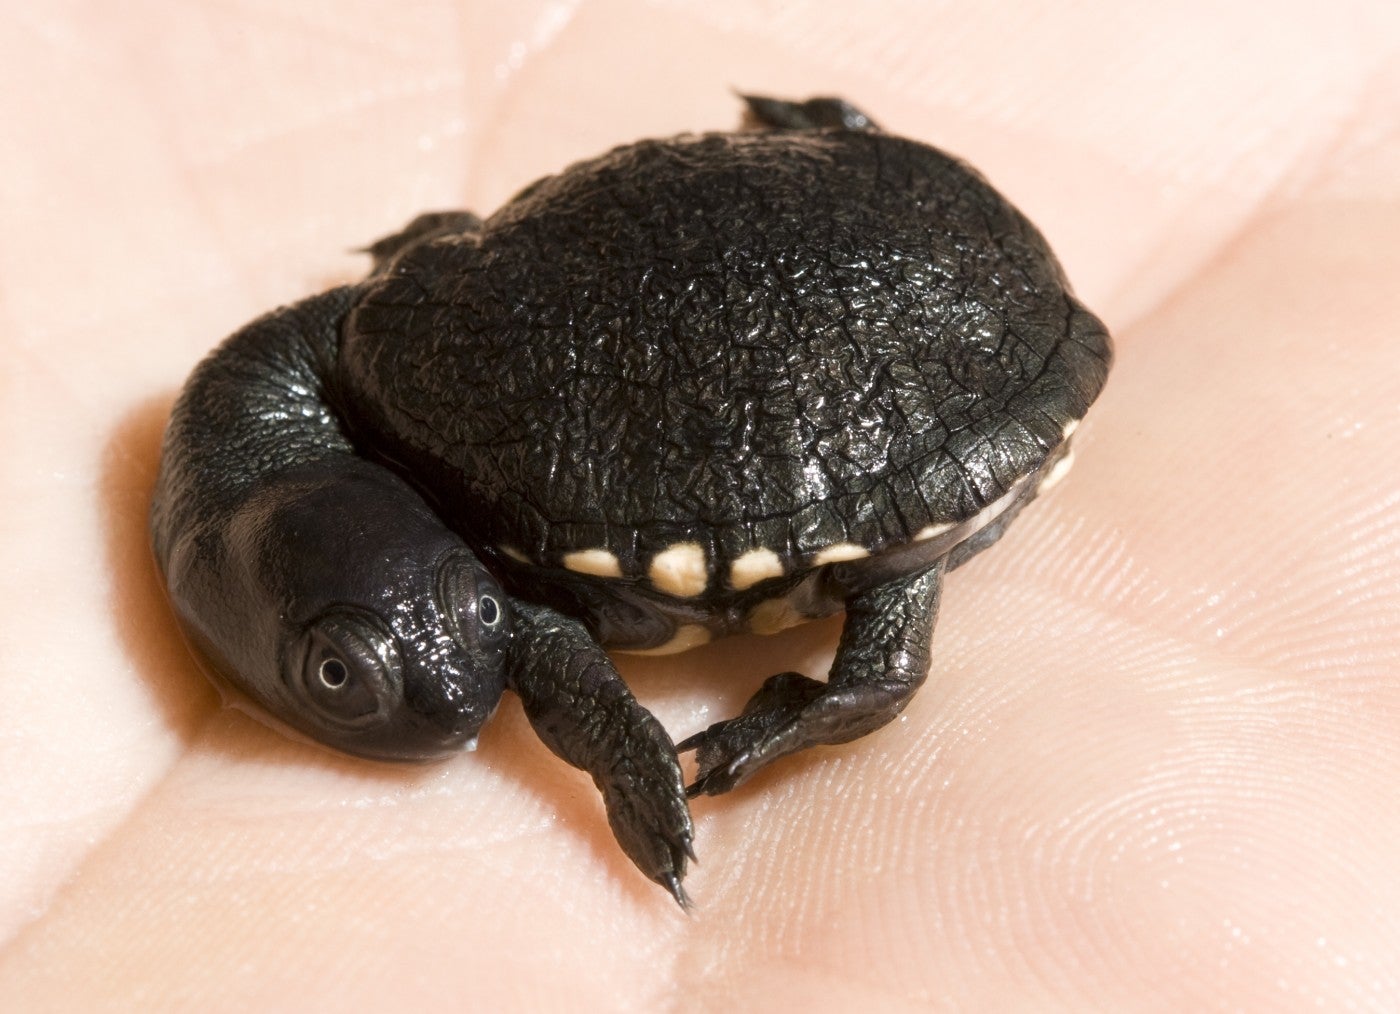 These Teeny, Tiny Turtle Hatchlings Fit in the Palm of Your Hand